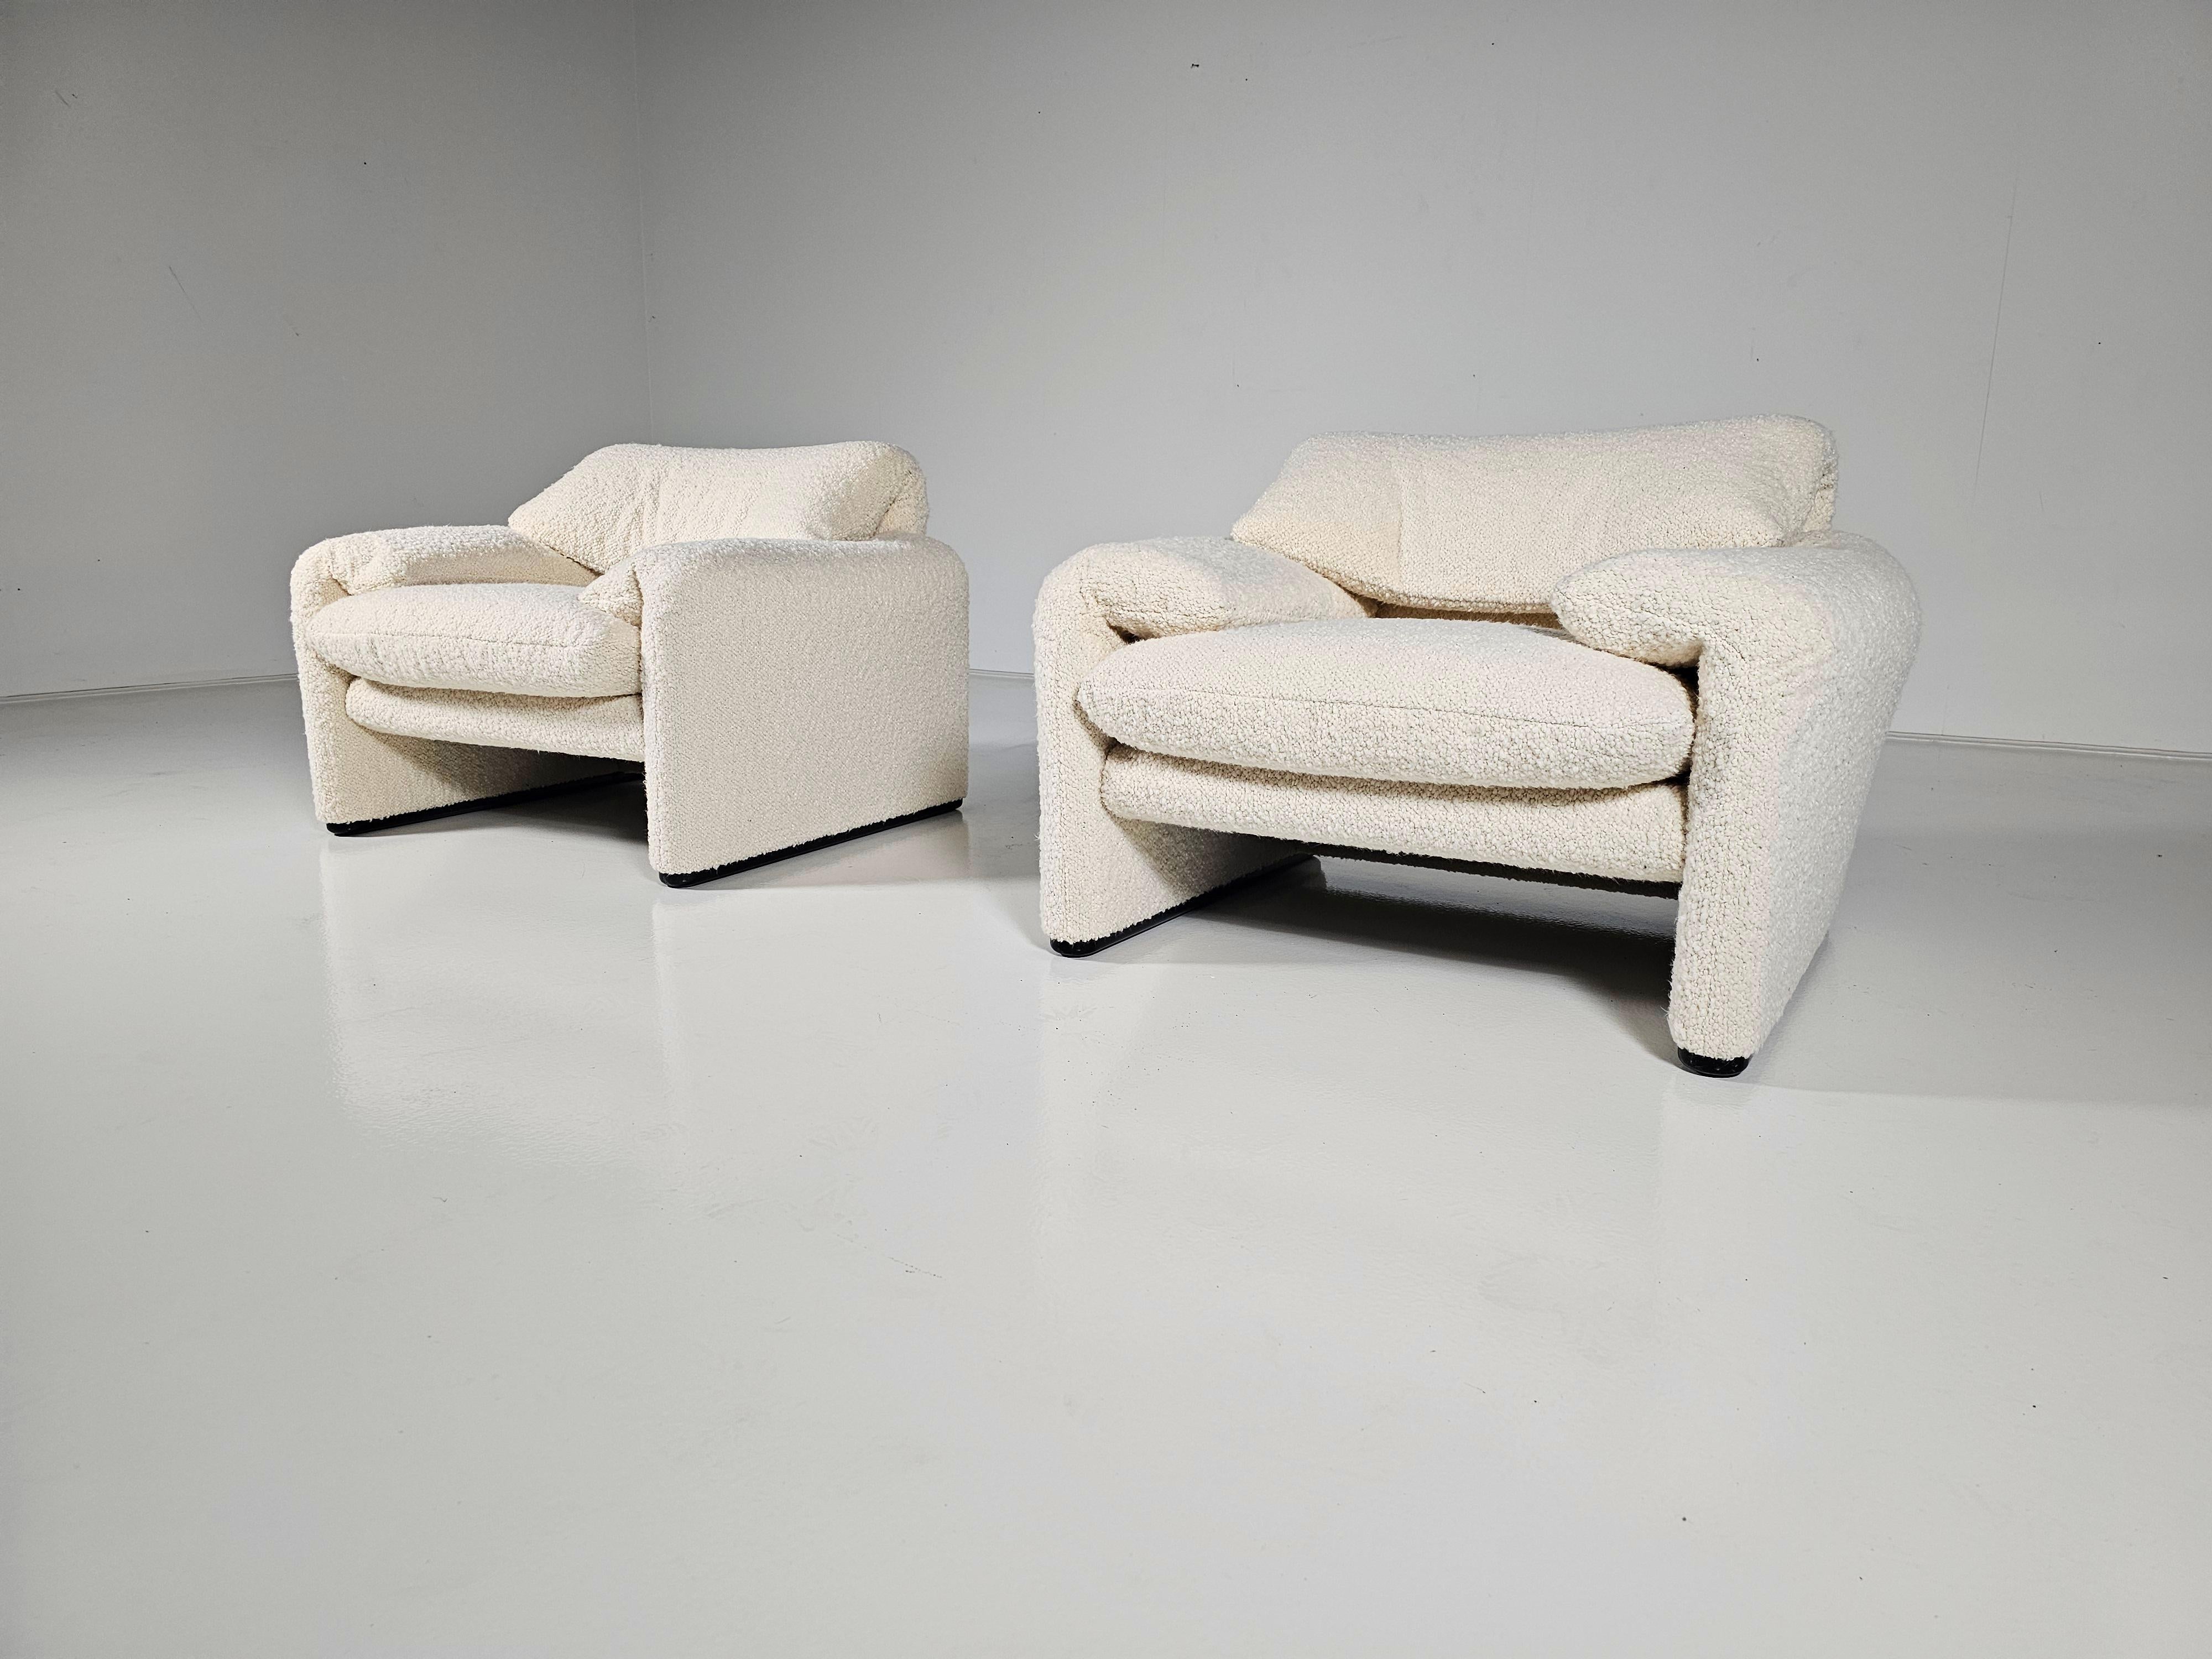 Bouclé Maralunga Chairs in cream boucle by Vico Magistretti for Cassina, 1970s